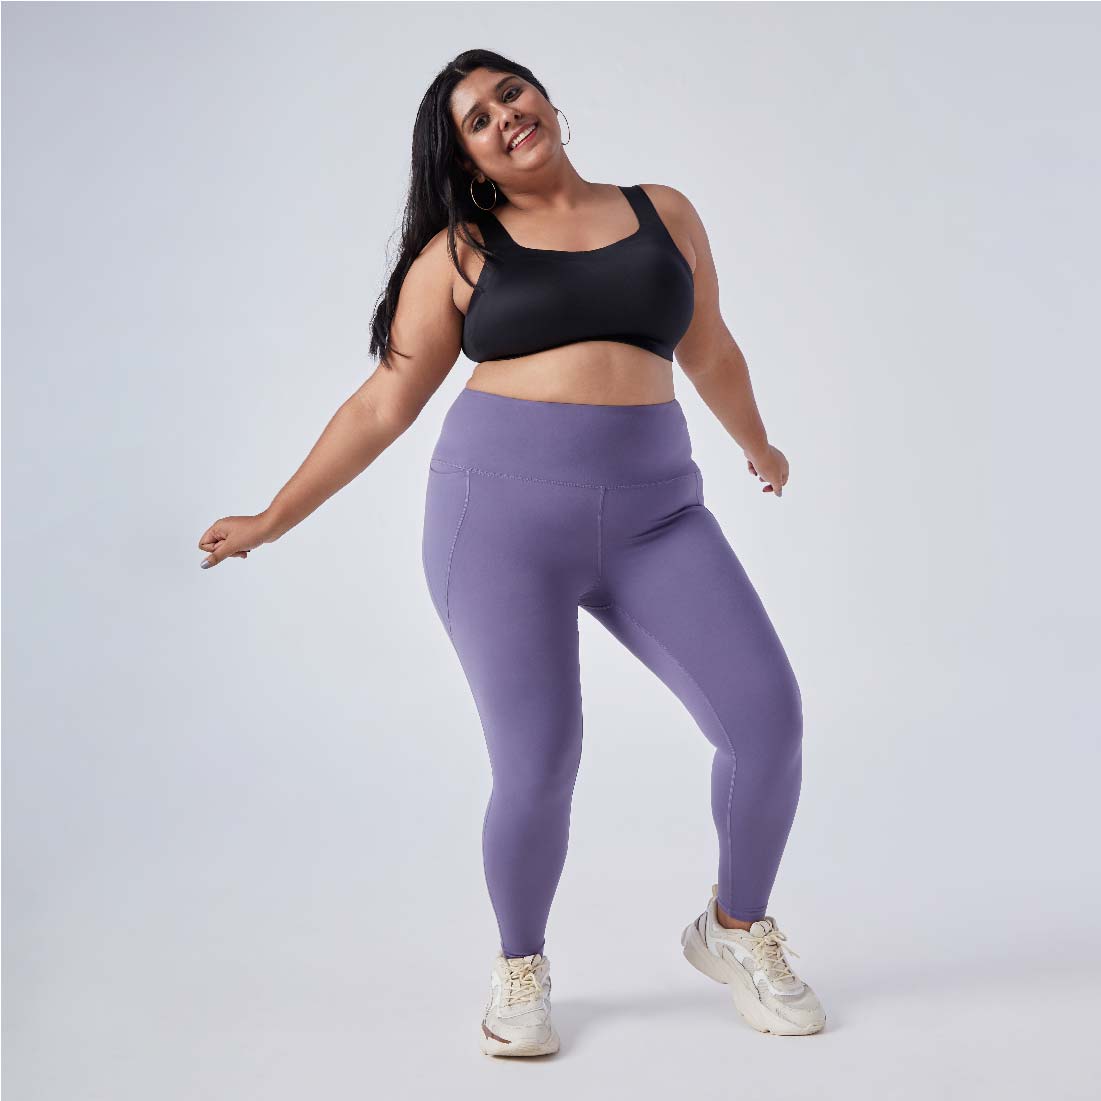 Sports Bra for Heavy Breasts: It’s All About Self-love in Movement